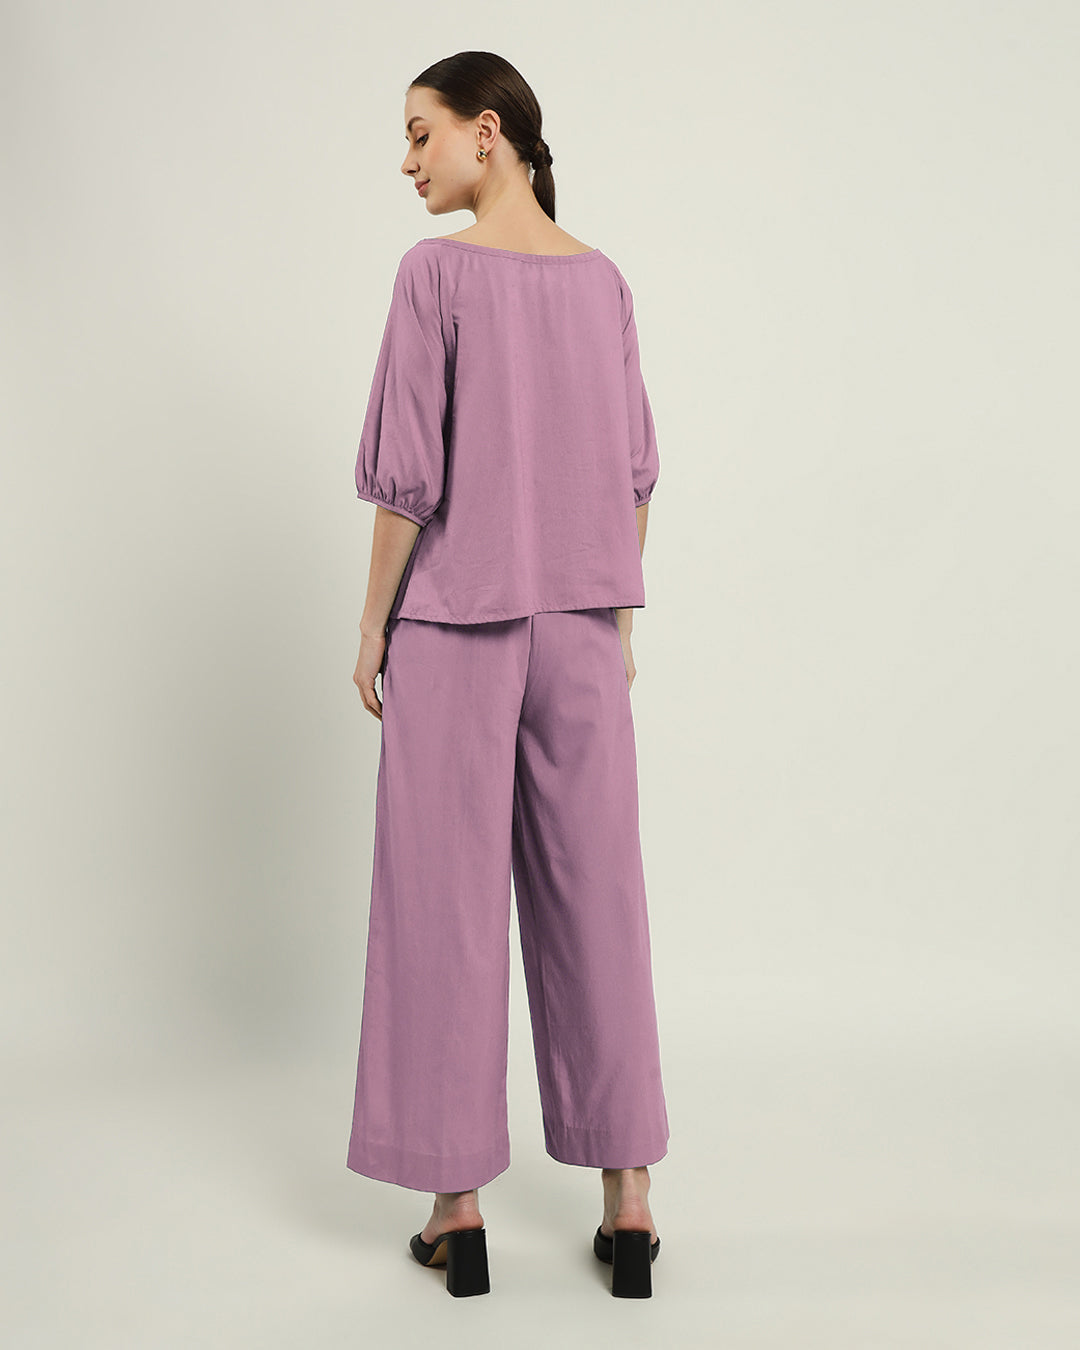 Purple Swirl Effortless BowtNeck Top (Without Bottoms)